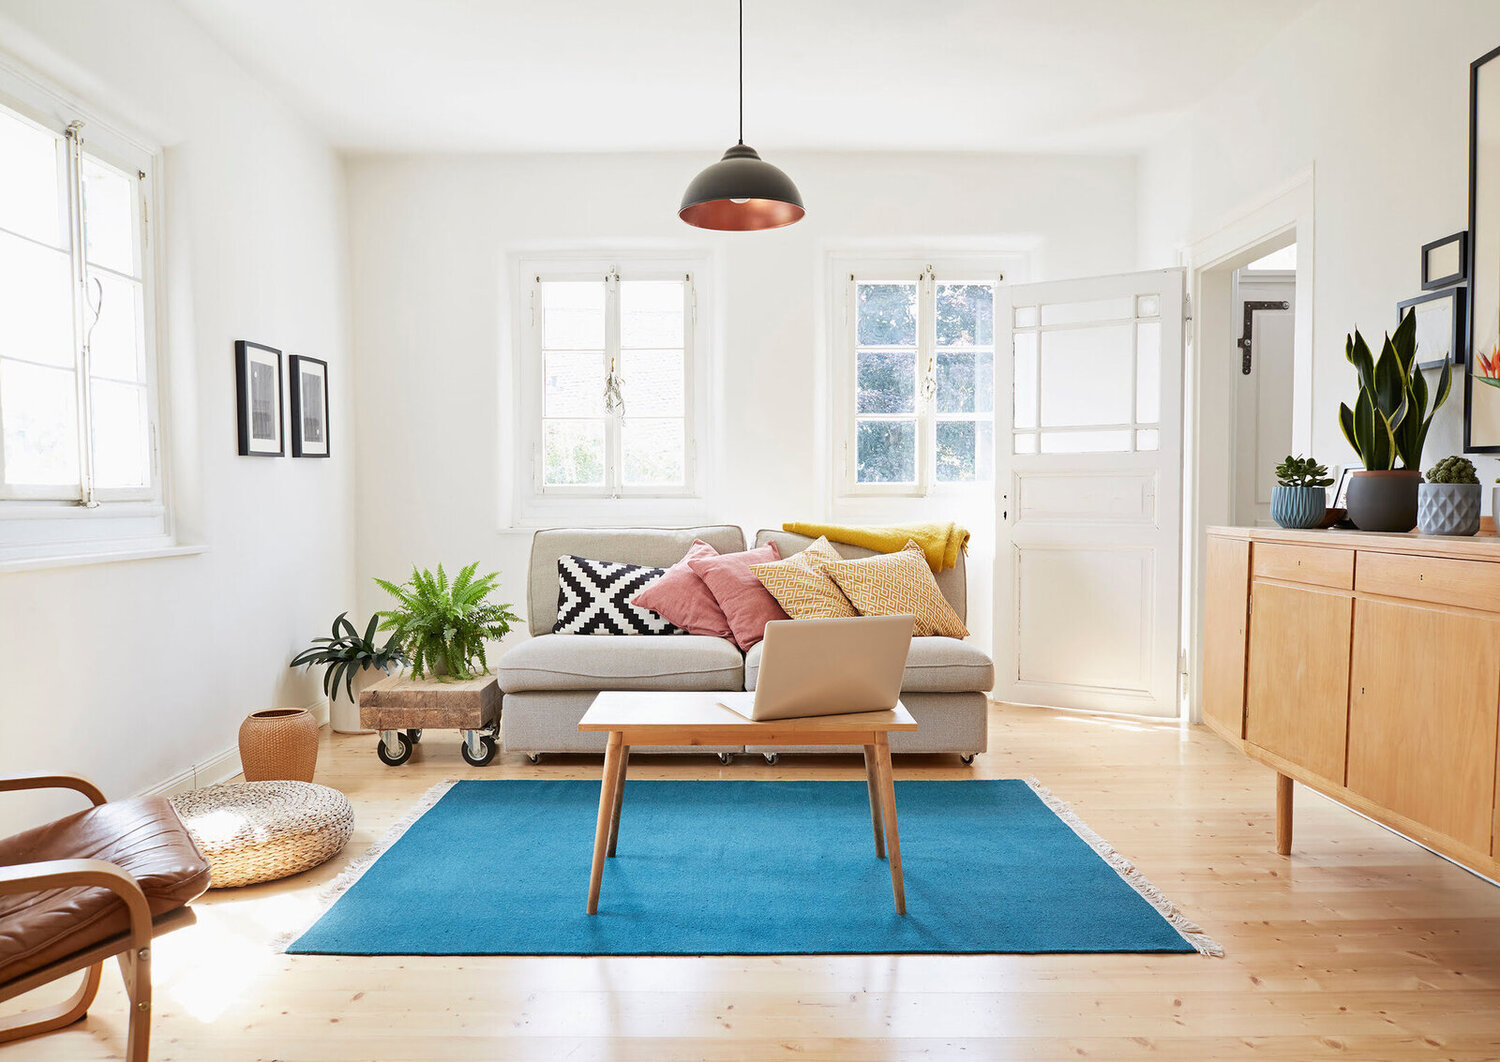 What Color Should You Not Paint Your Living Room?